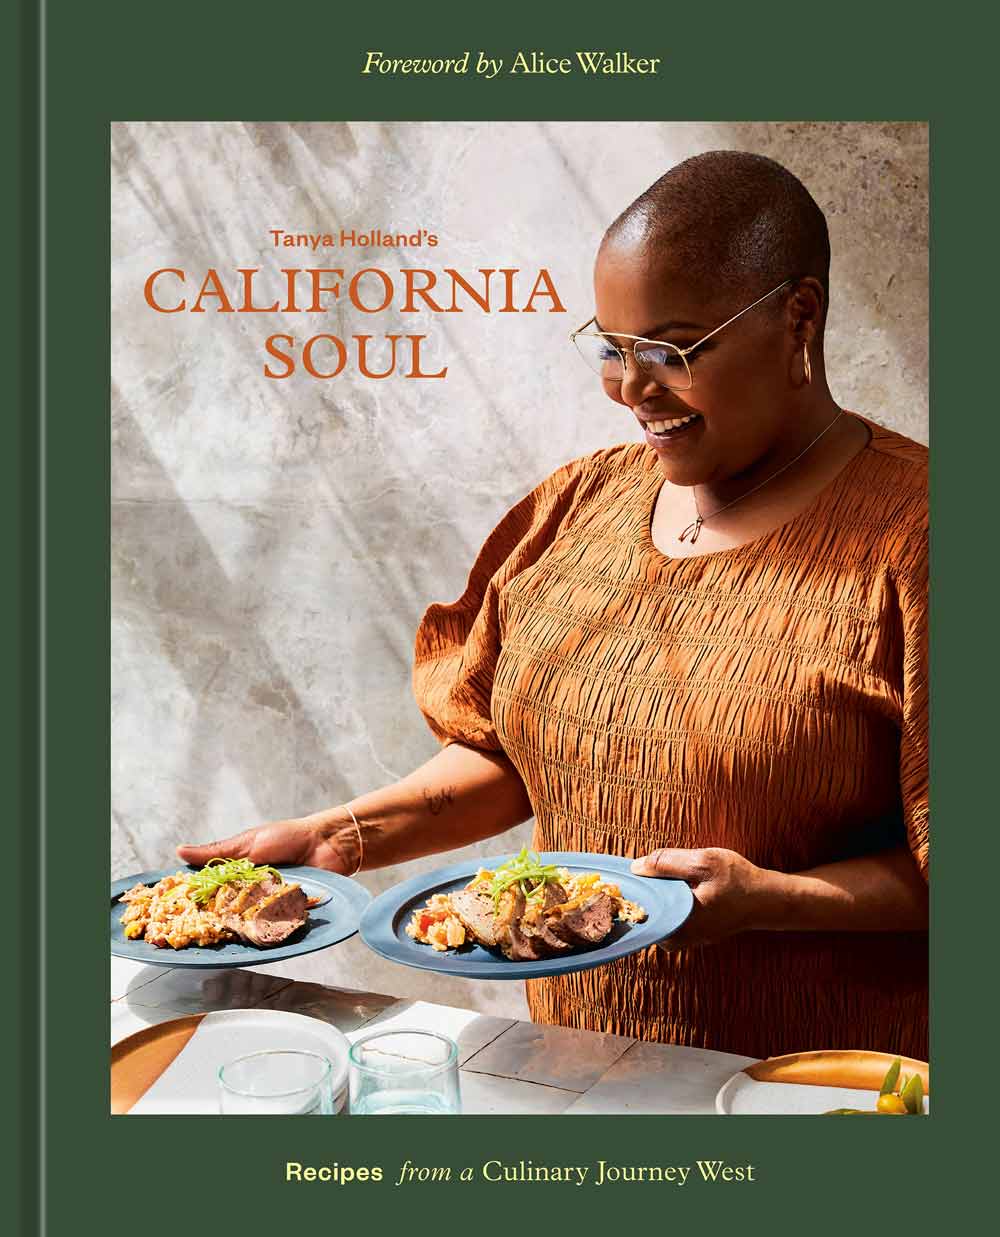 The cover of Holland's book California Soul